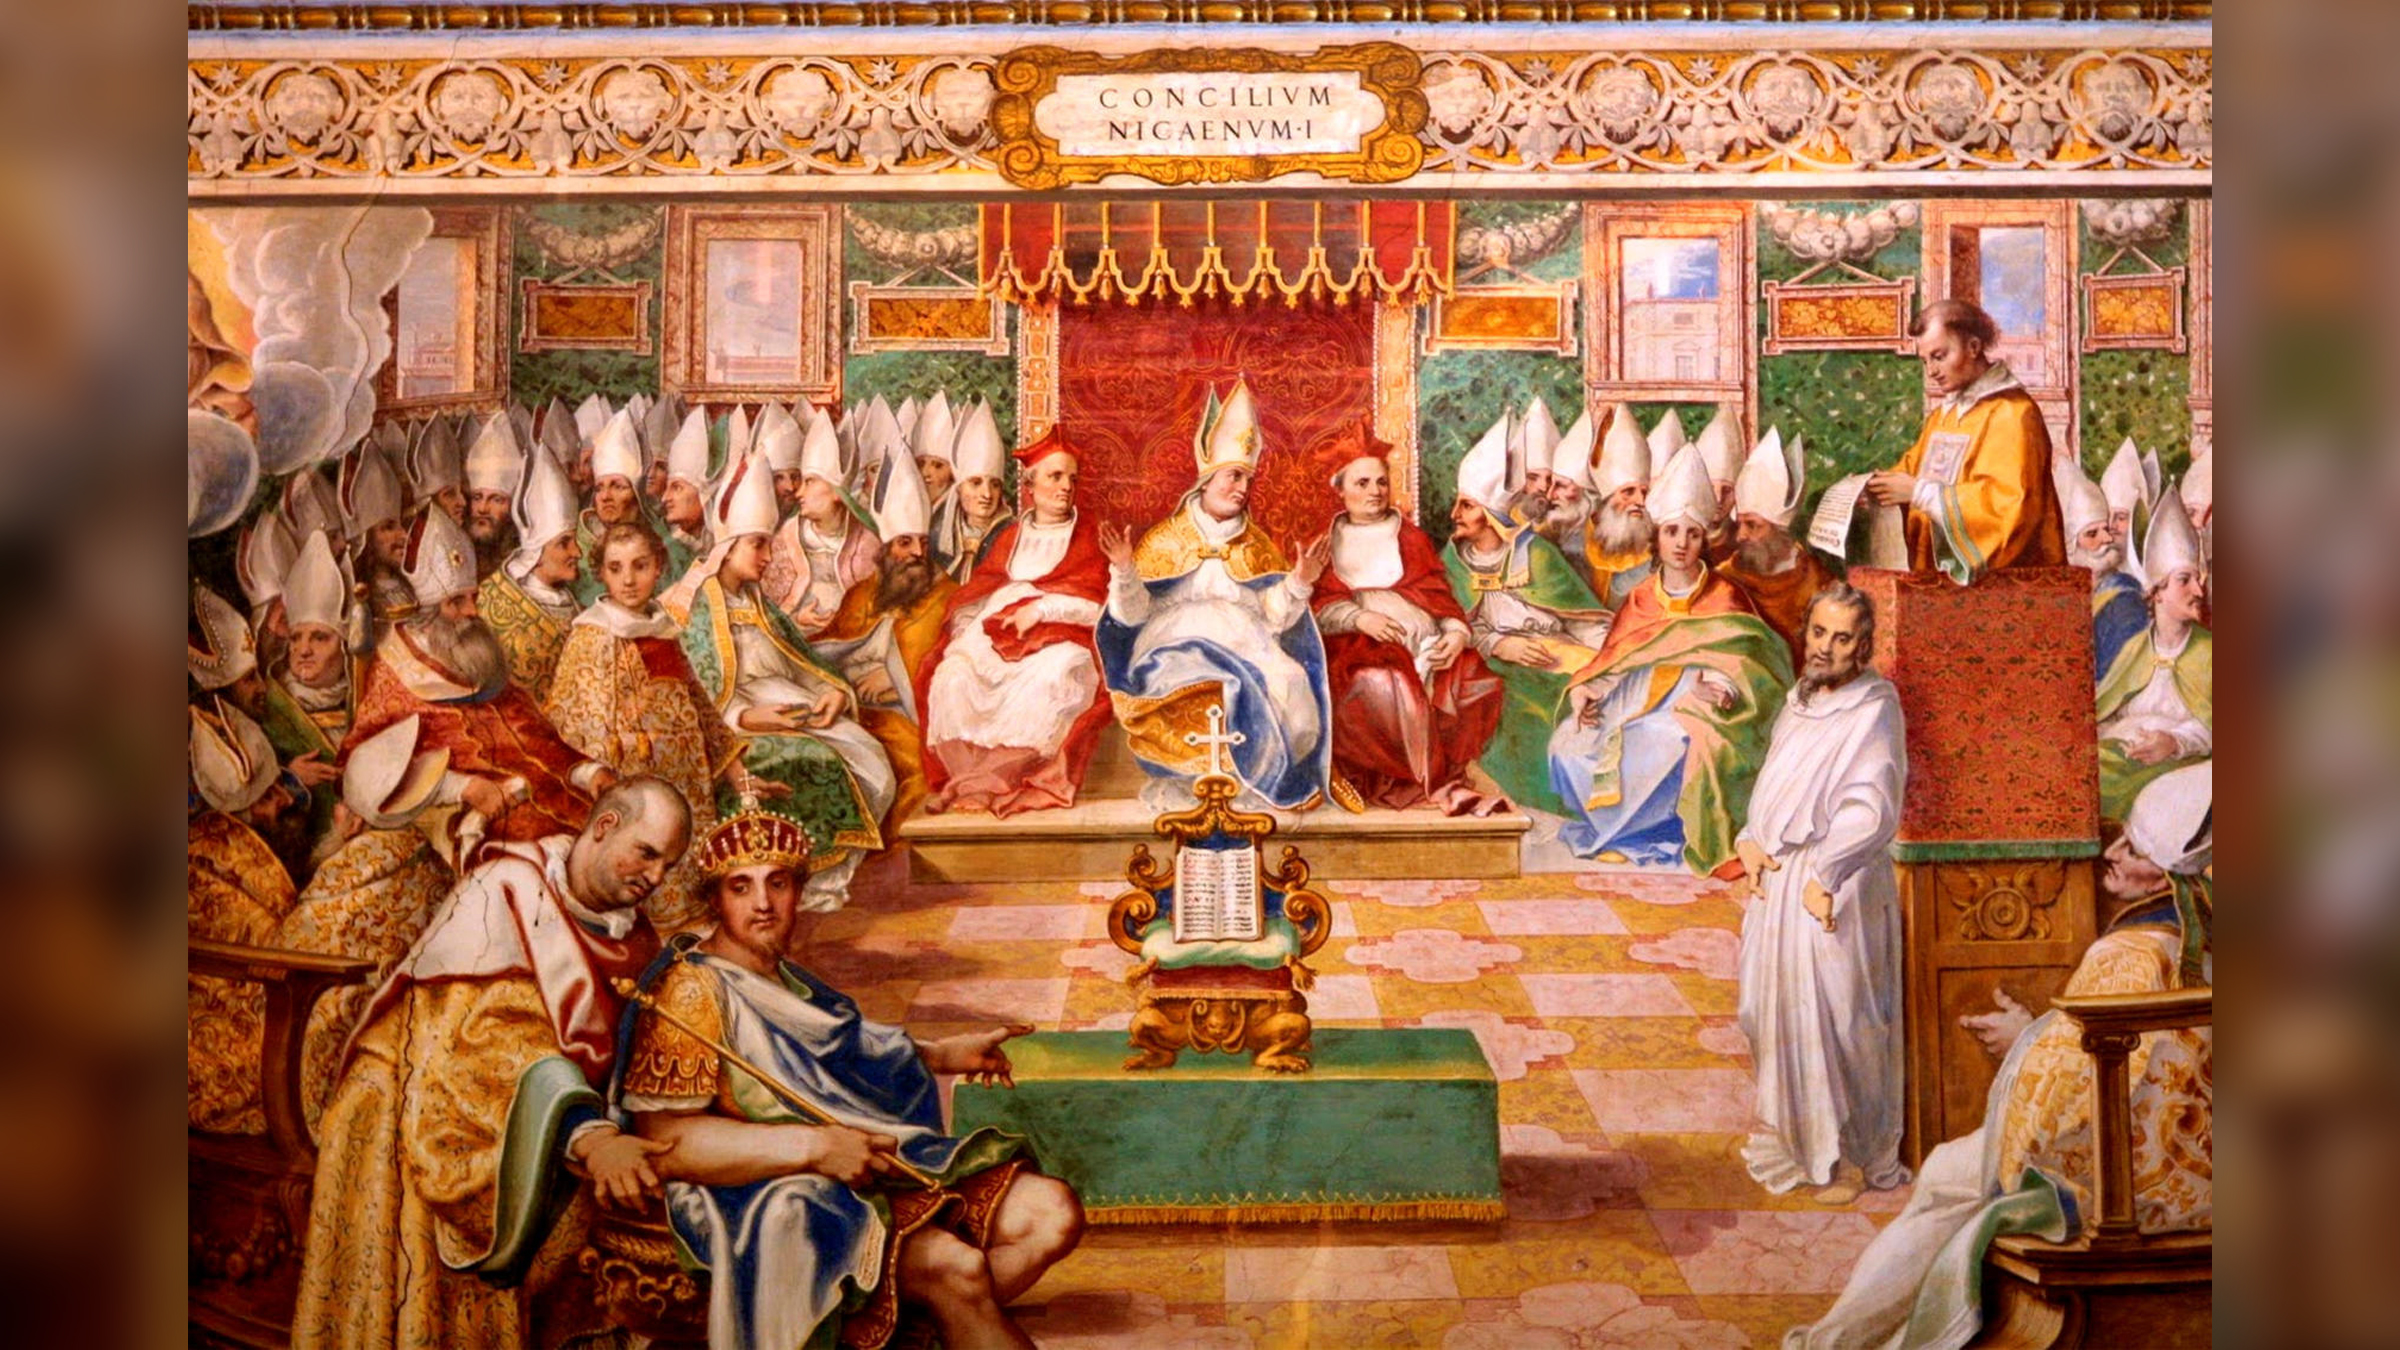 A painting of the Council of Nicaea in A.D. 325